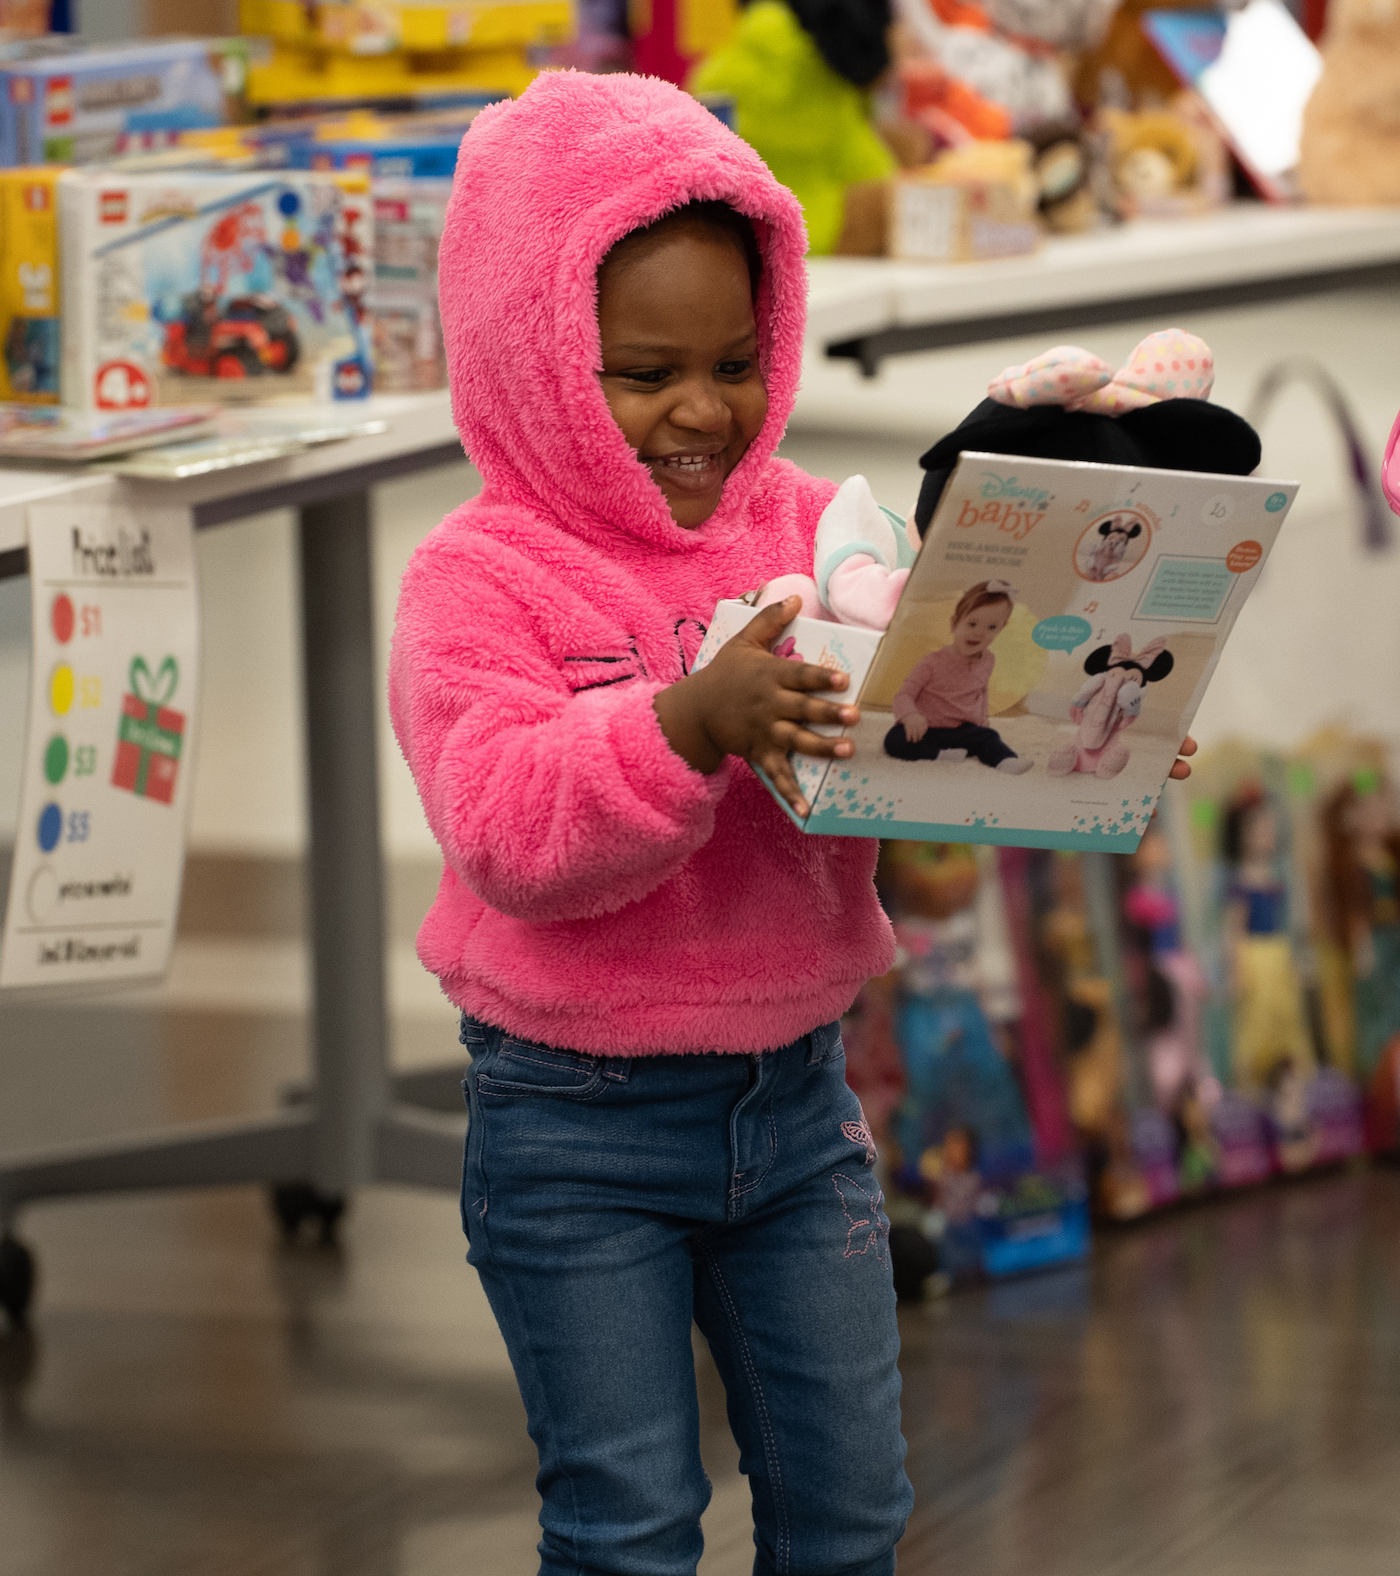 Little girl in pink sweater with hood up holding minnie mouse doll and smiling at the Christmas Store